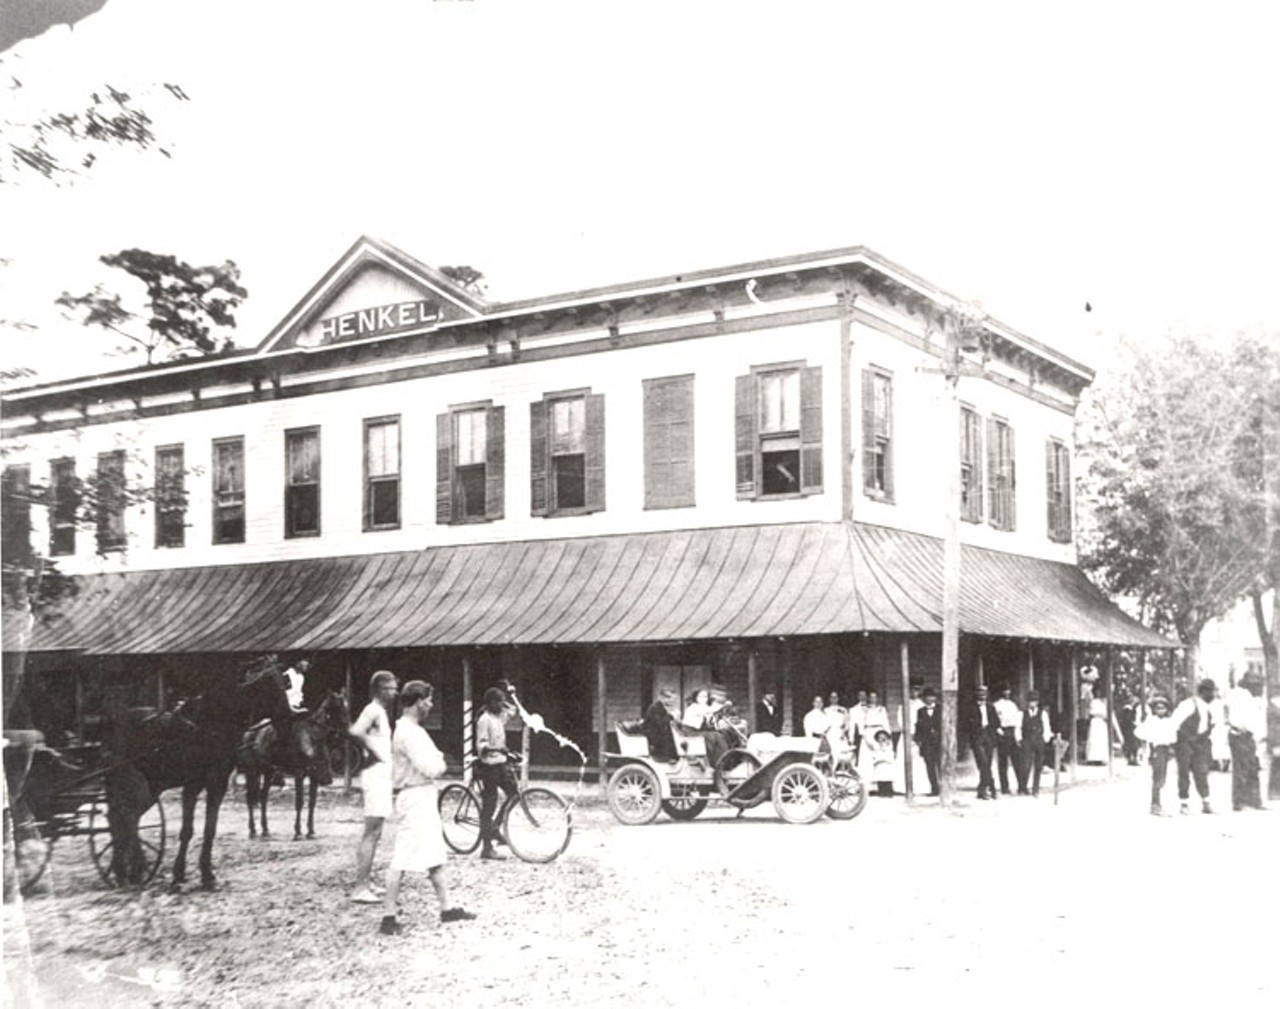 In 1891, the Henkel Block opened on Park Avenue with five stores, including Dr. Henkel&#146;s medical office and a drug store. This &#147;block&#148; contained the only stores for several years.
Photo via Winter Park Public Library Archive